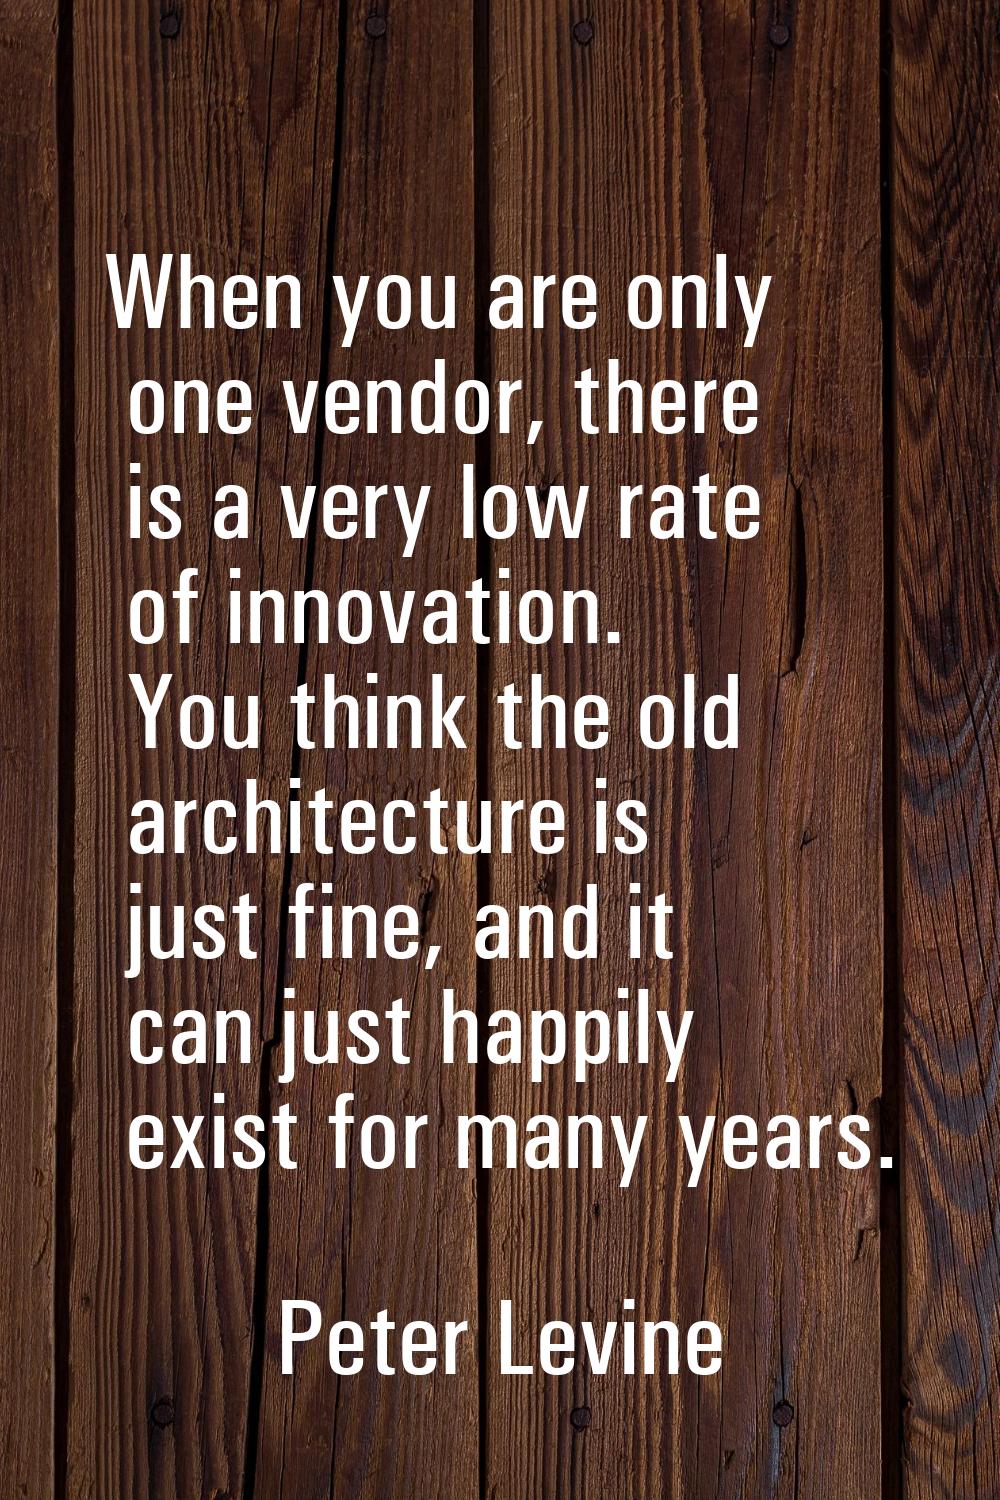 When you are only one vendor, there is a very low rate of innovation. You think the old architectur